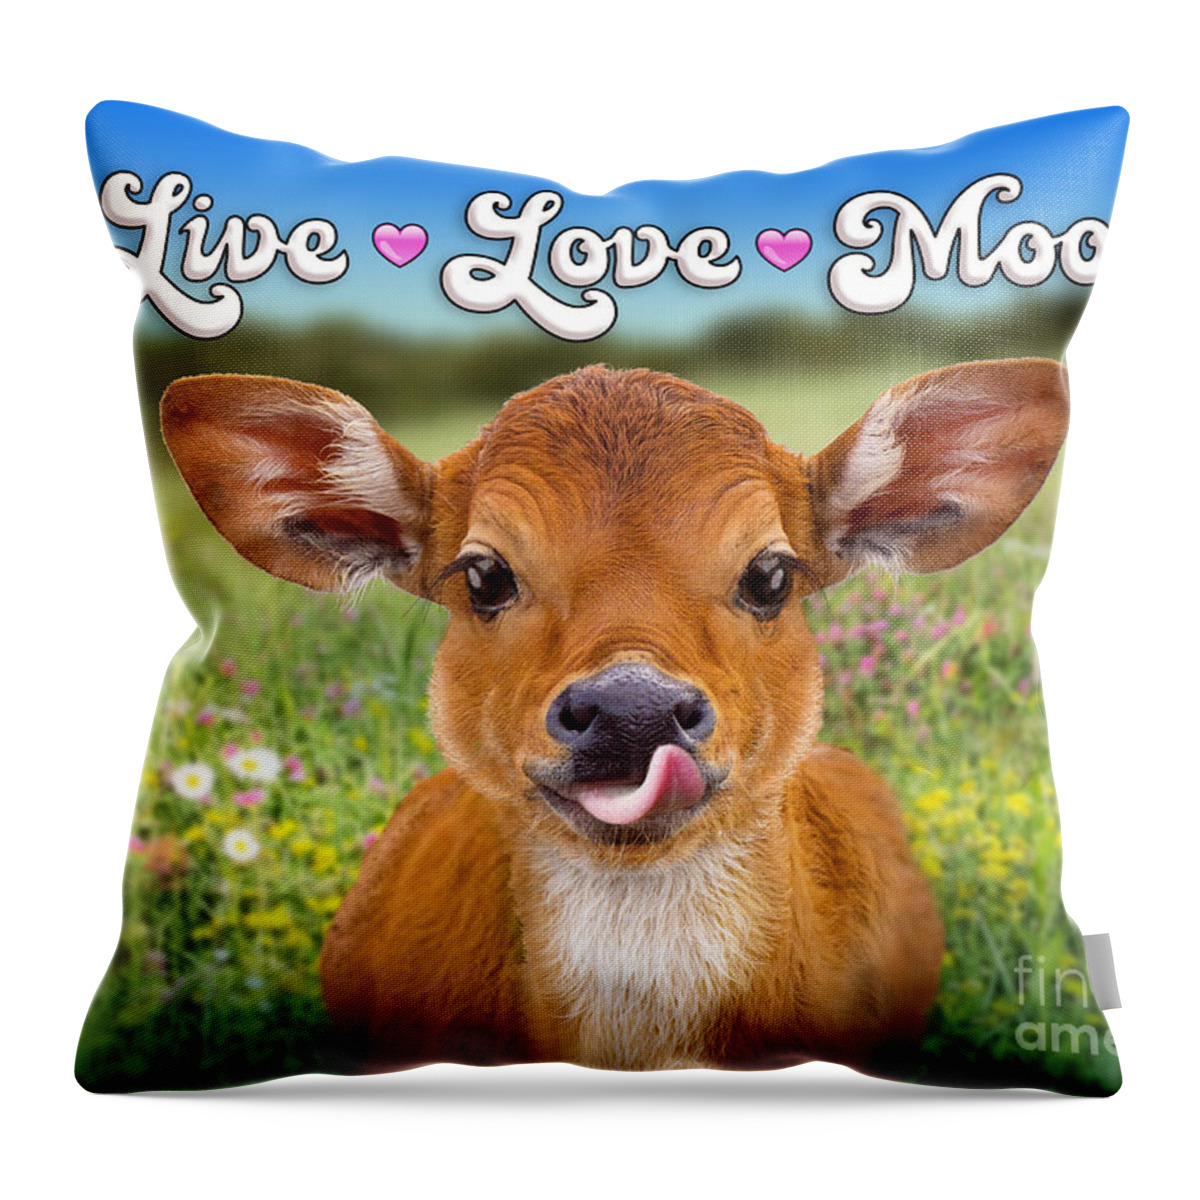 Calf Throw Pillow featuring the digital art Live Love Moo by Evie Cook